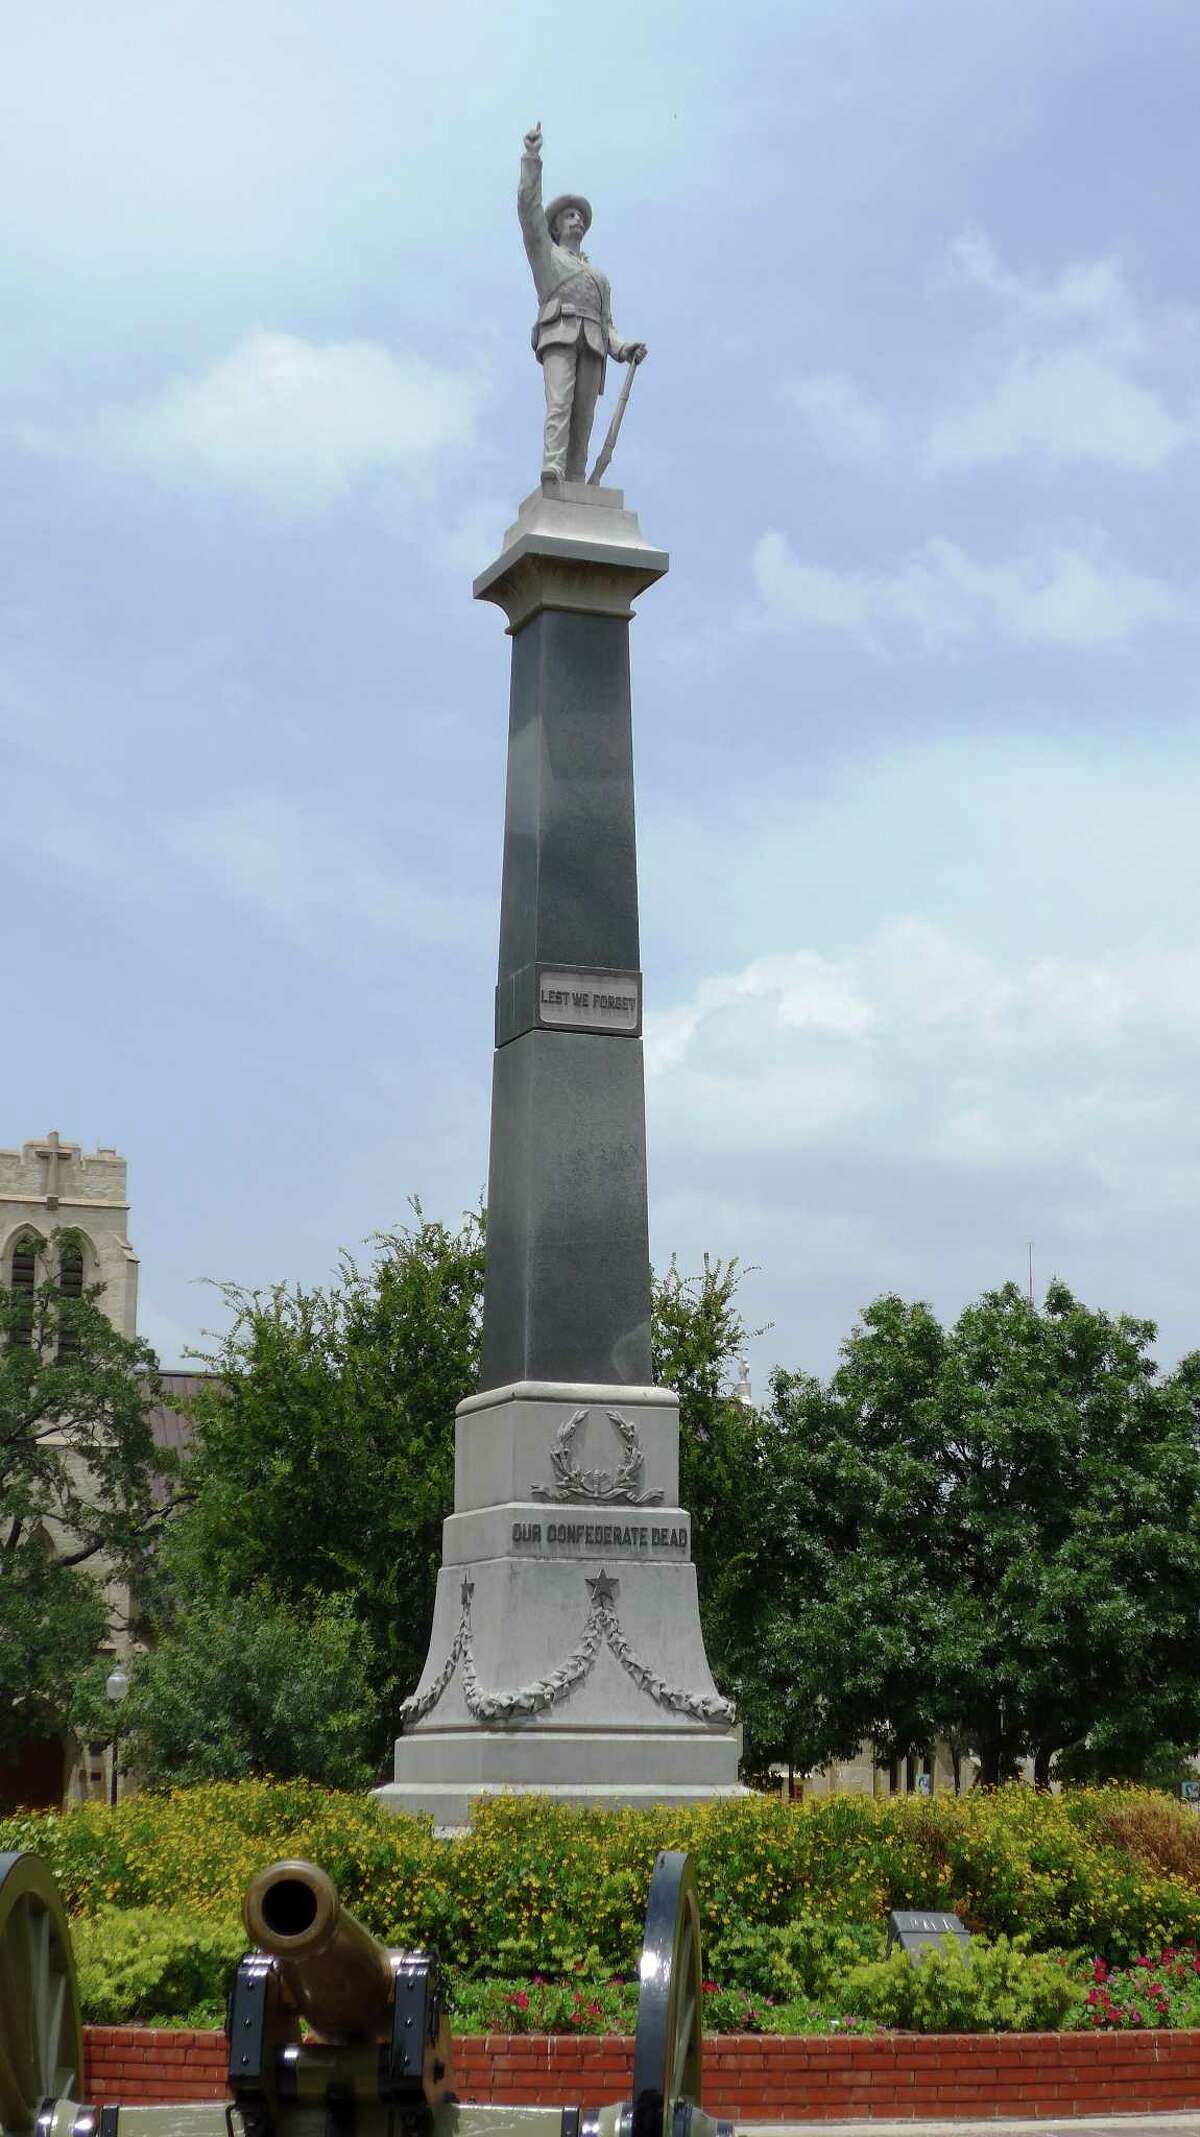 A monument to Confederate war dead, erected in city-owned Travis Park in 1899, says “Lest We Forget” and “Our Confederate Dead.” To many, this is an affront. To others, it’s a way to honor history.